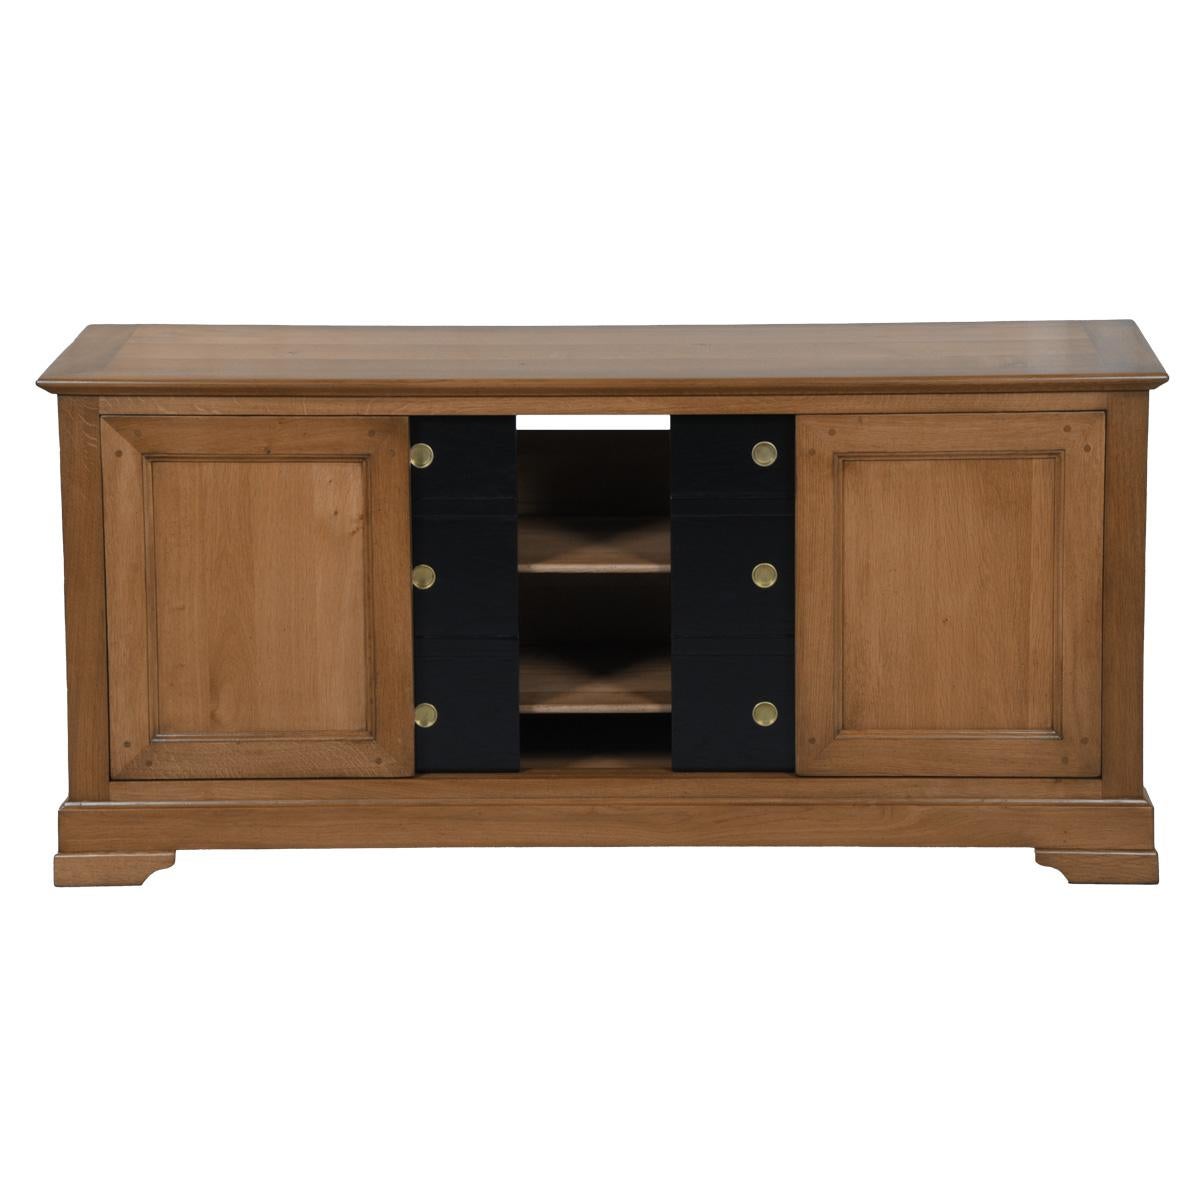 This TV cabinet is a hand made interpretation of the French Louis Philippe style. Created in France in the 19th century , this woodworking is caracterized by its curved moldings, hand-curved feet and rounded design.

4 sliding doors allow you to